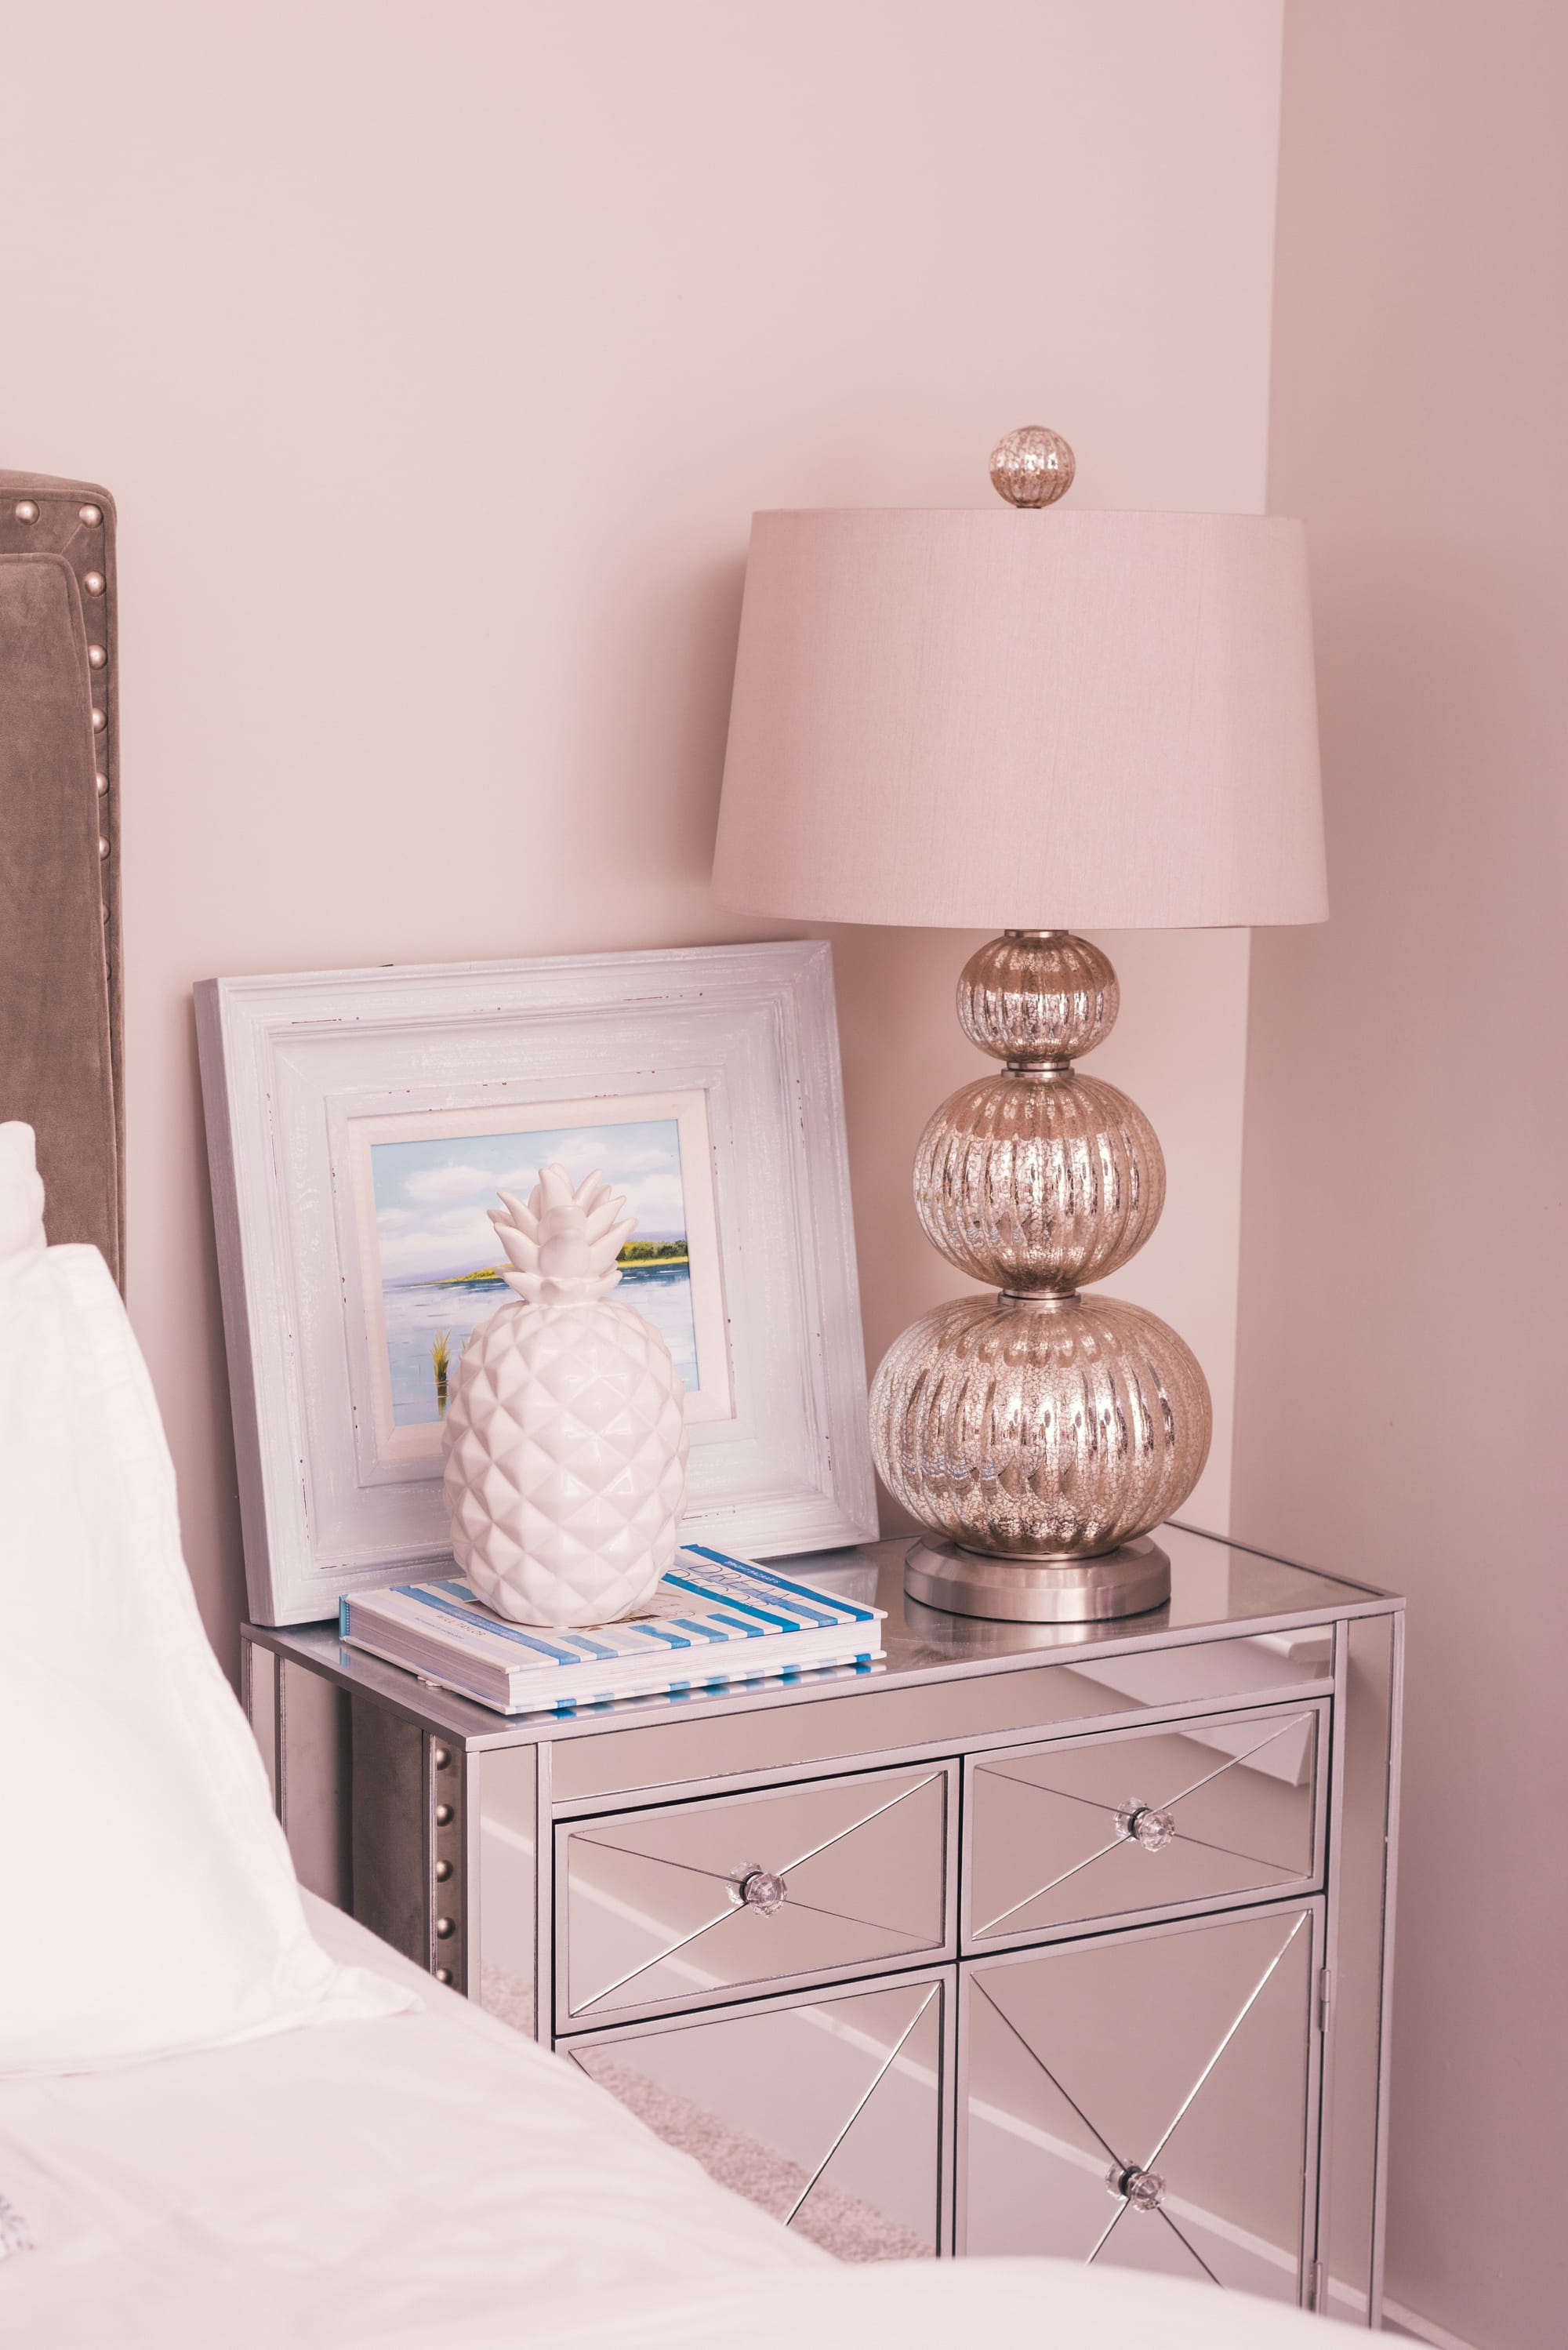 A metal bedside table and a funky lamp